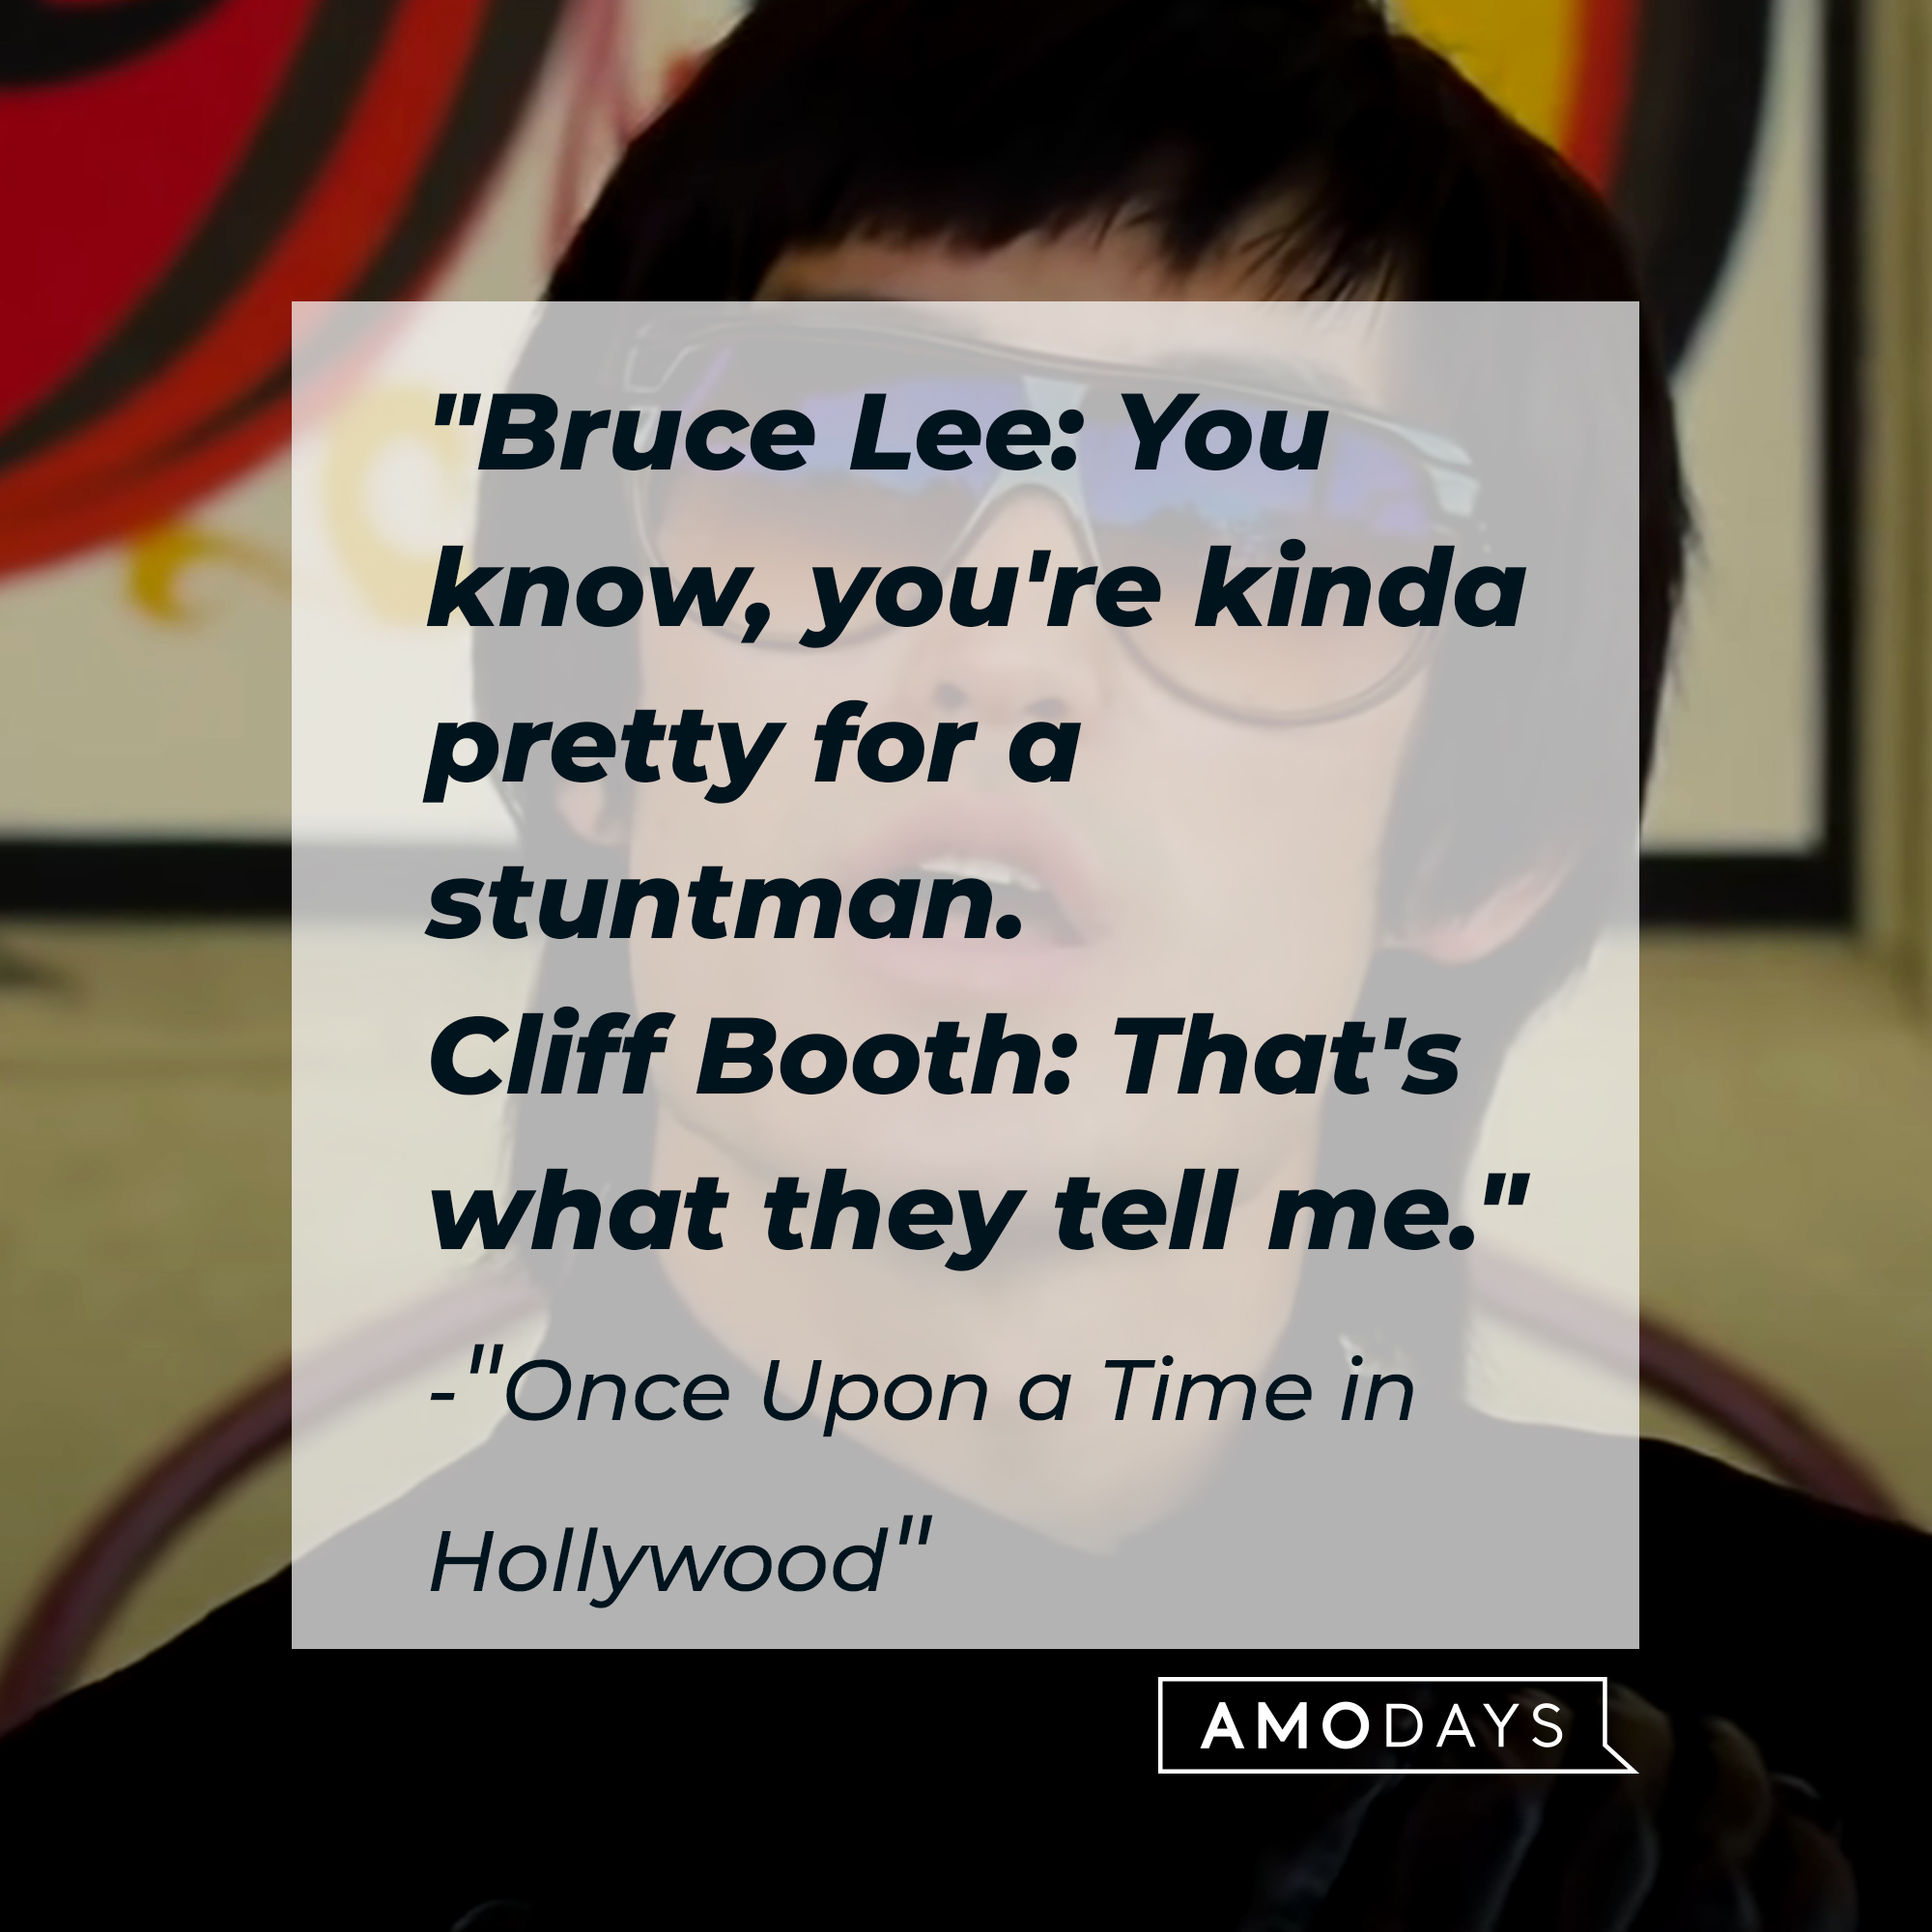 Bruce Lee with the dialogue, "Bruce Lee: You know, you're kinda pretty for a stuntman. Cliff Booth: That's what they tell me." | Source: OnceInHollywood